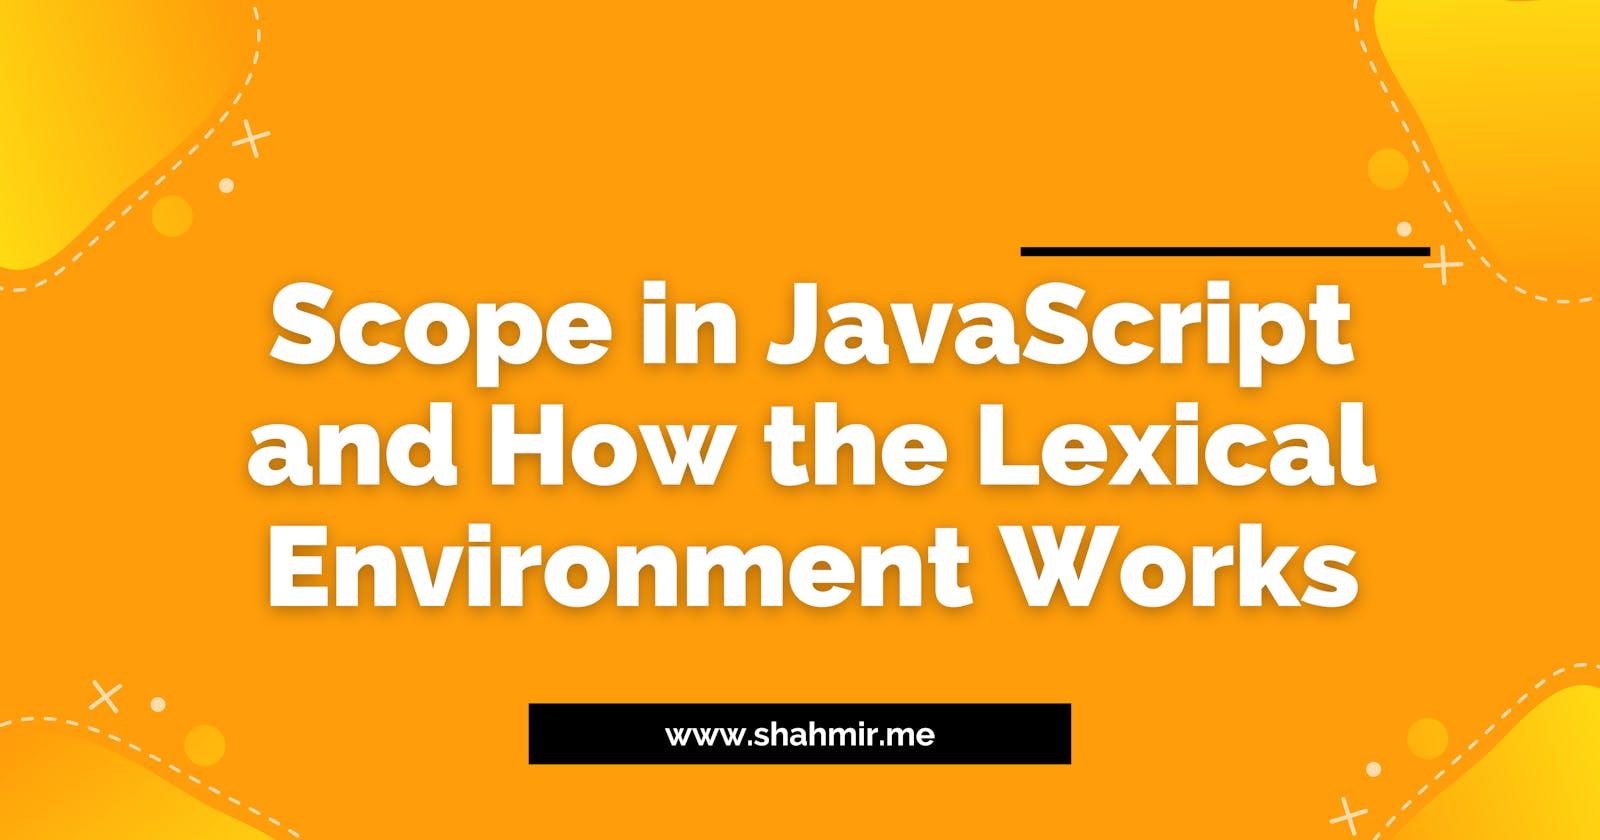 Scope in JavaScript and How the Lexical Environment Works